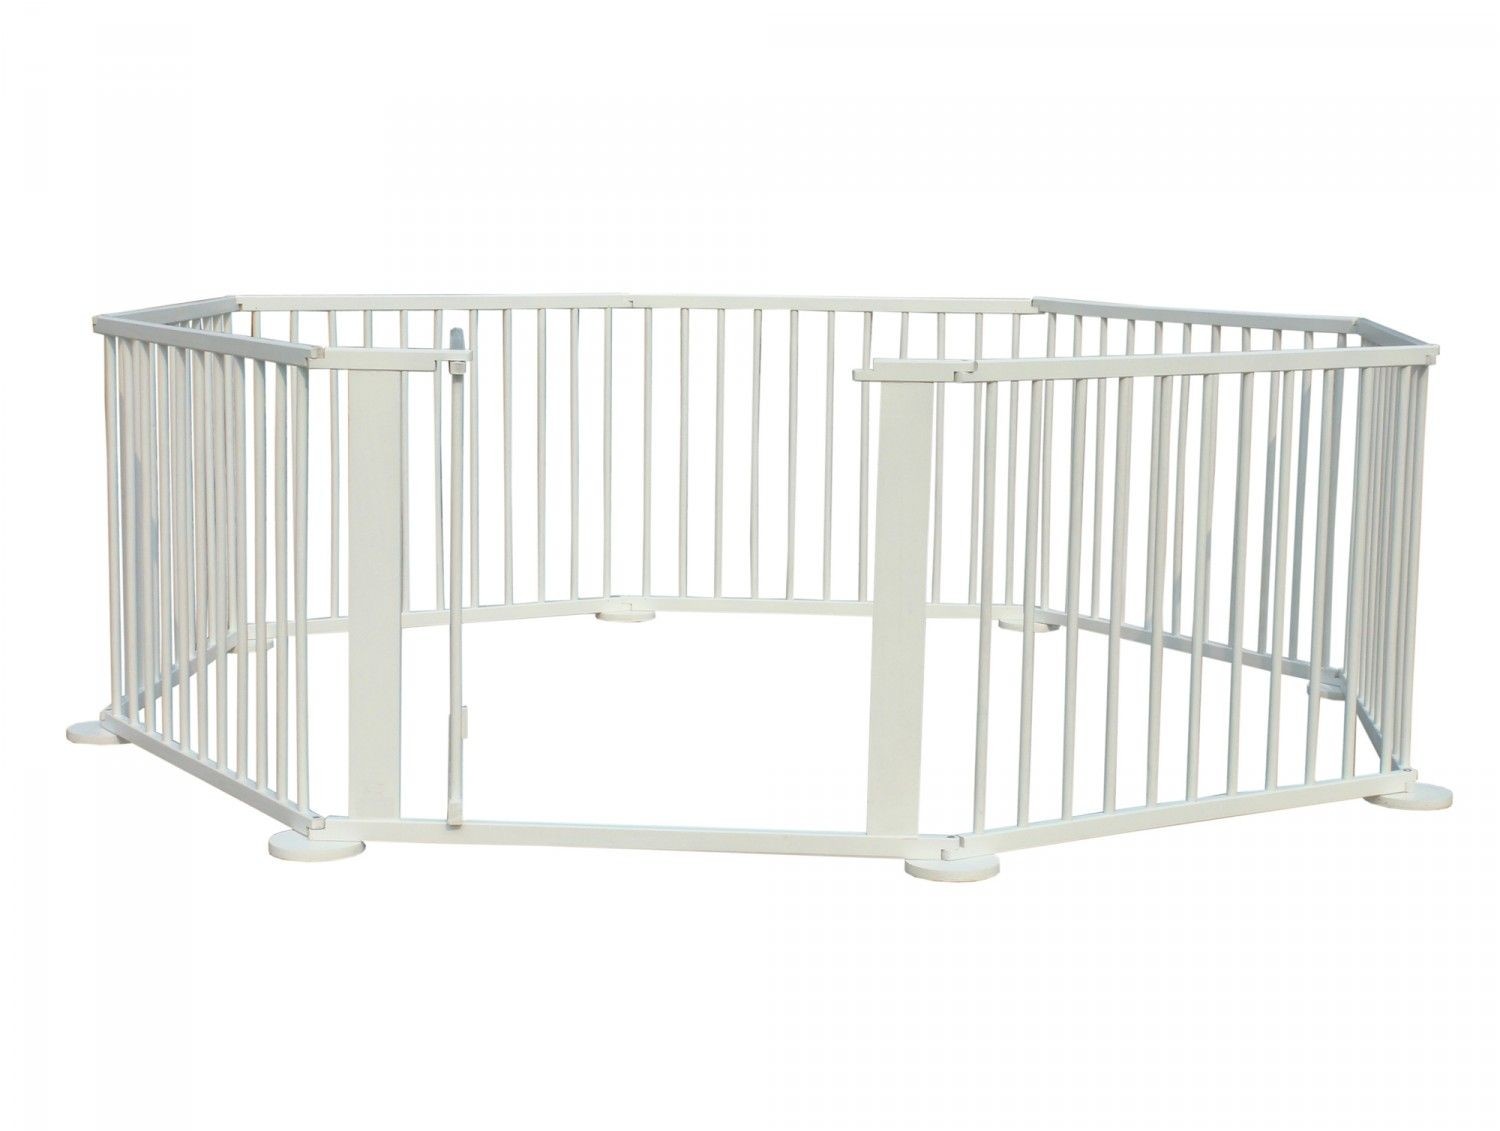 Large play pen